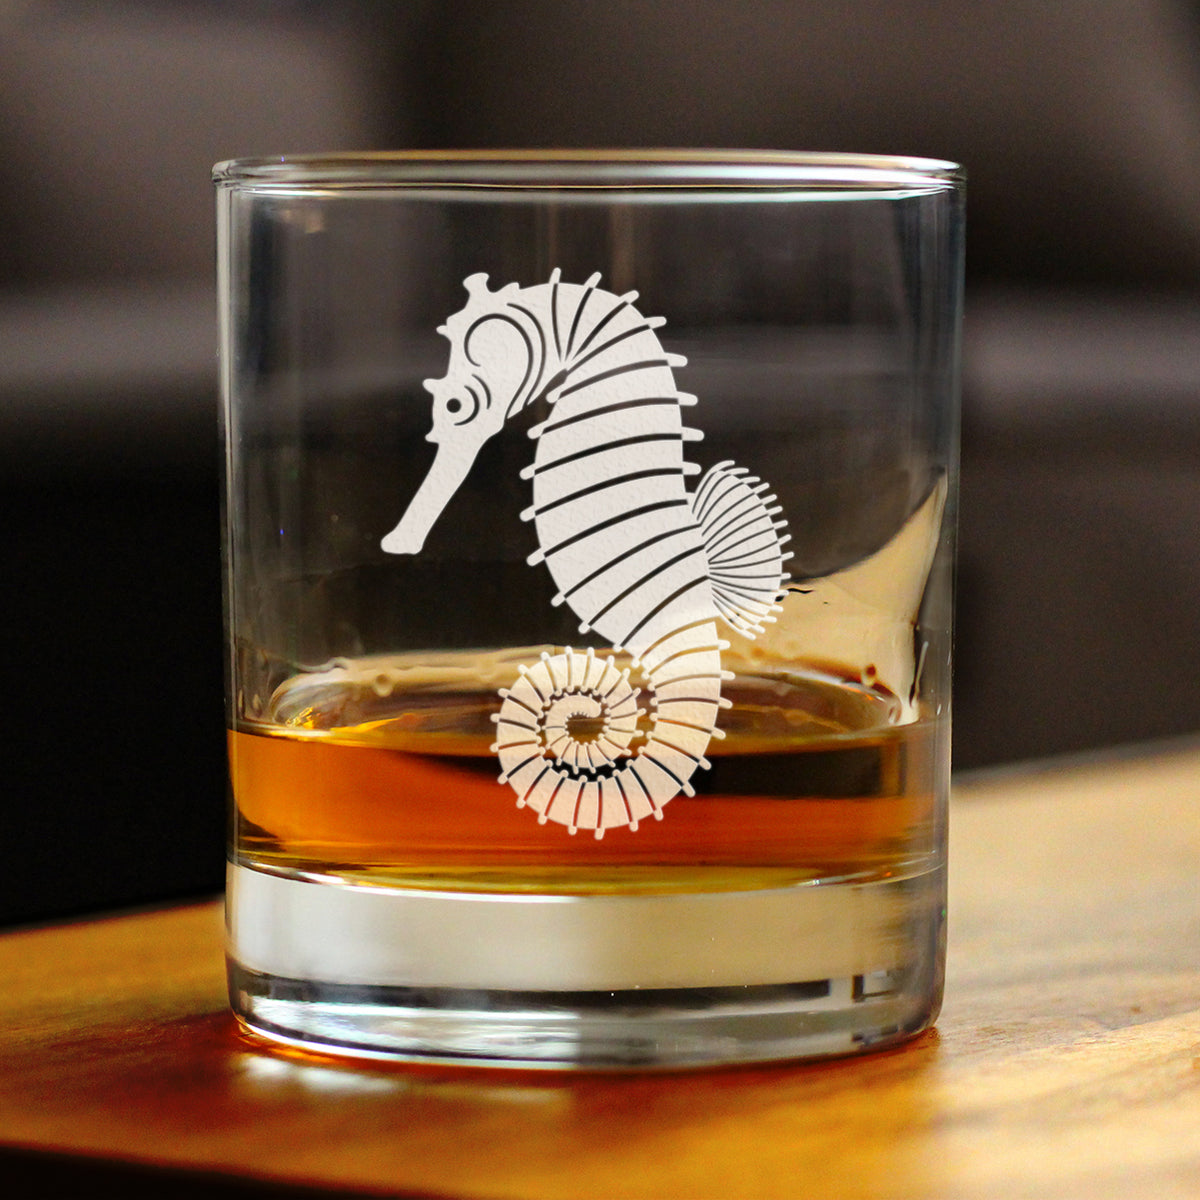 Seahorse Rocks Glass - Unique Beachy Summer Gifts and Beach House Decor - 10.25 Oz Glasses